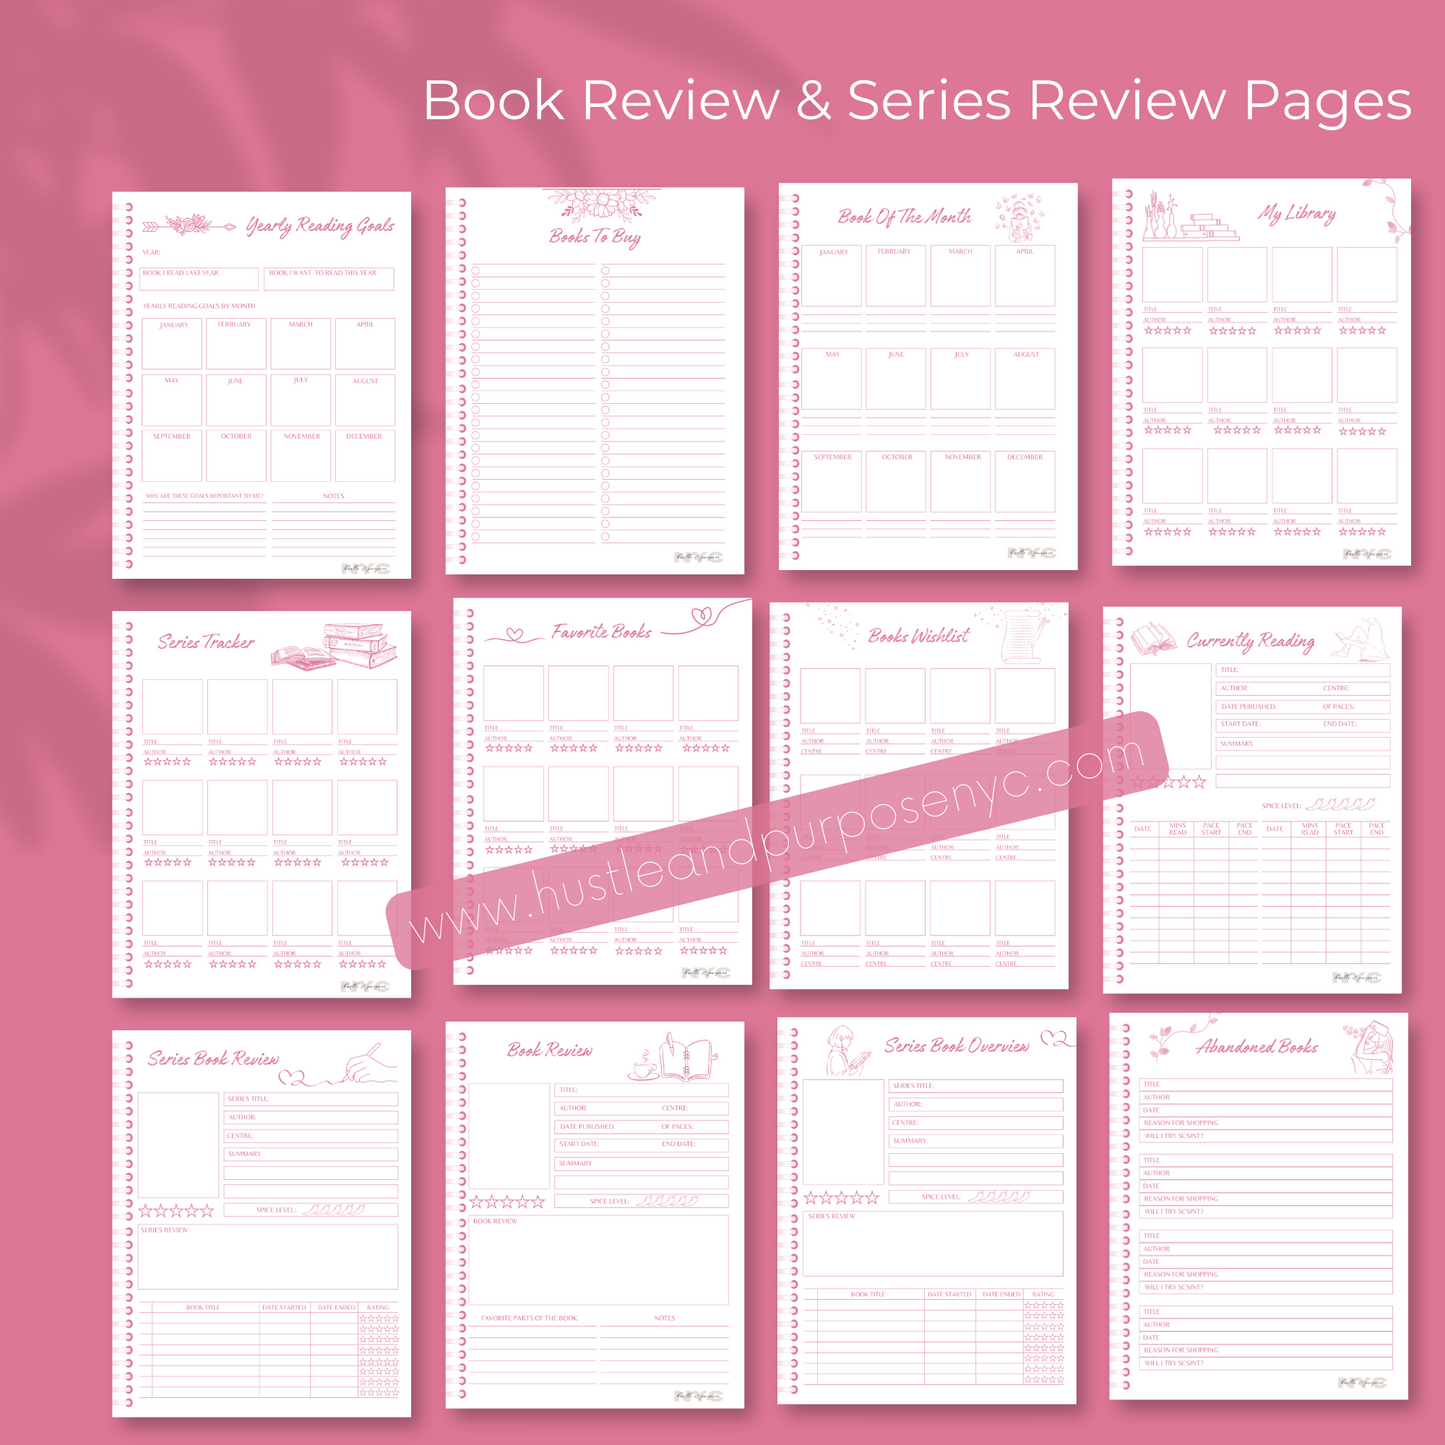 39-Page Reading Journal and Tracker Bundle - Pink Theme